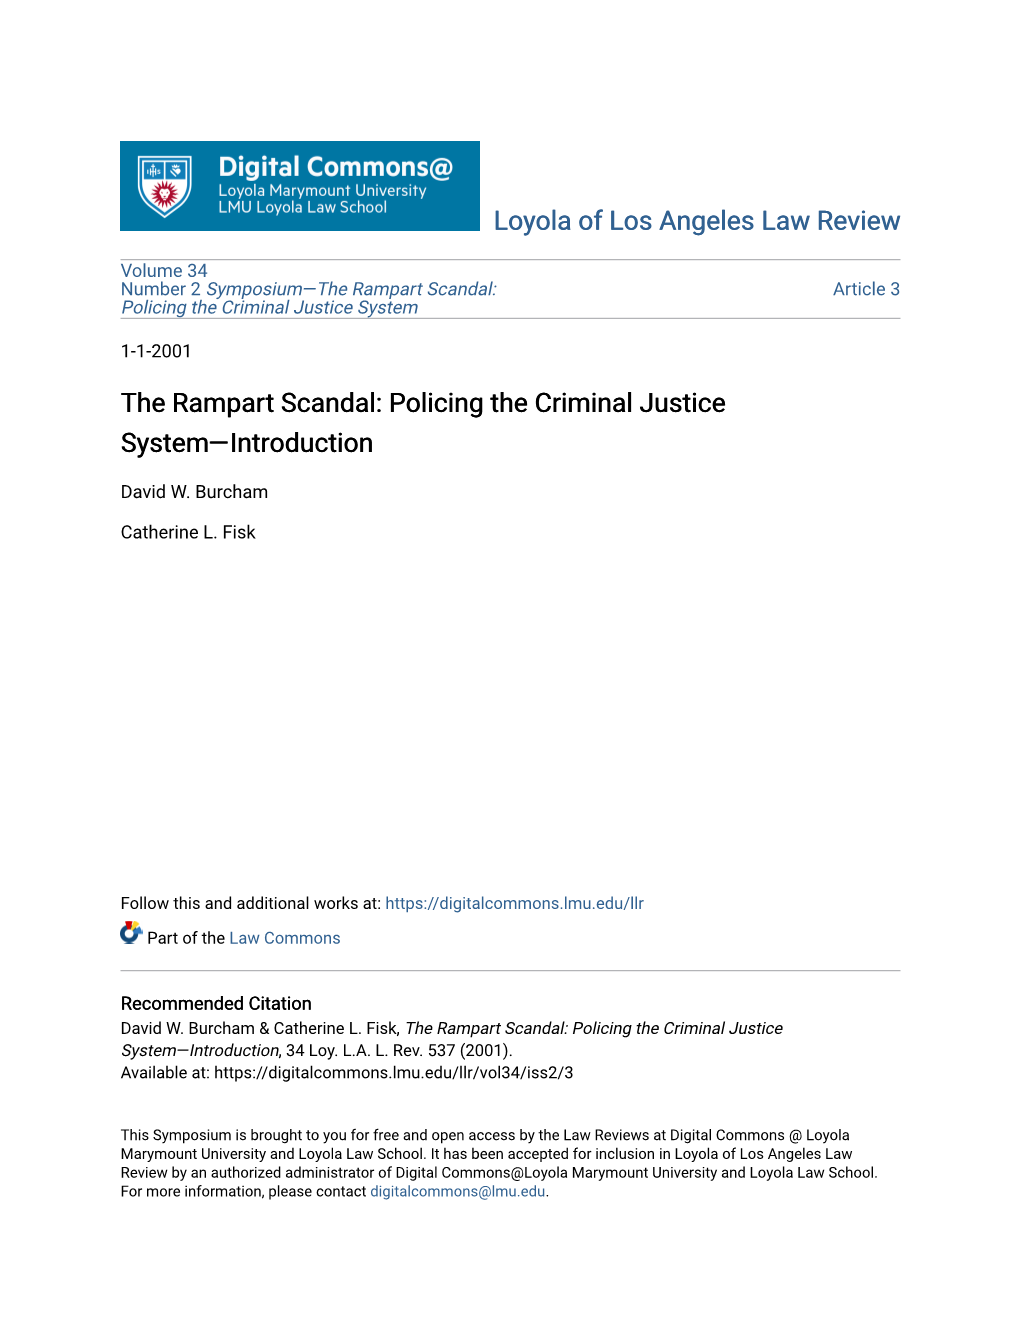 The Rampart Scandal: Article 3 Policing the Criminal Justice System